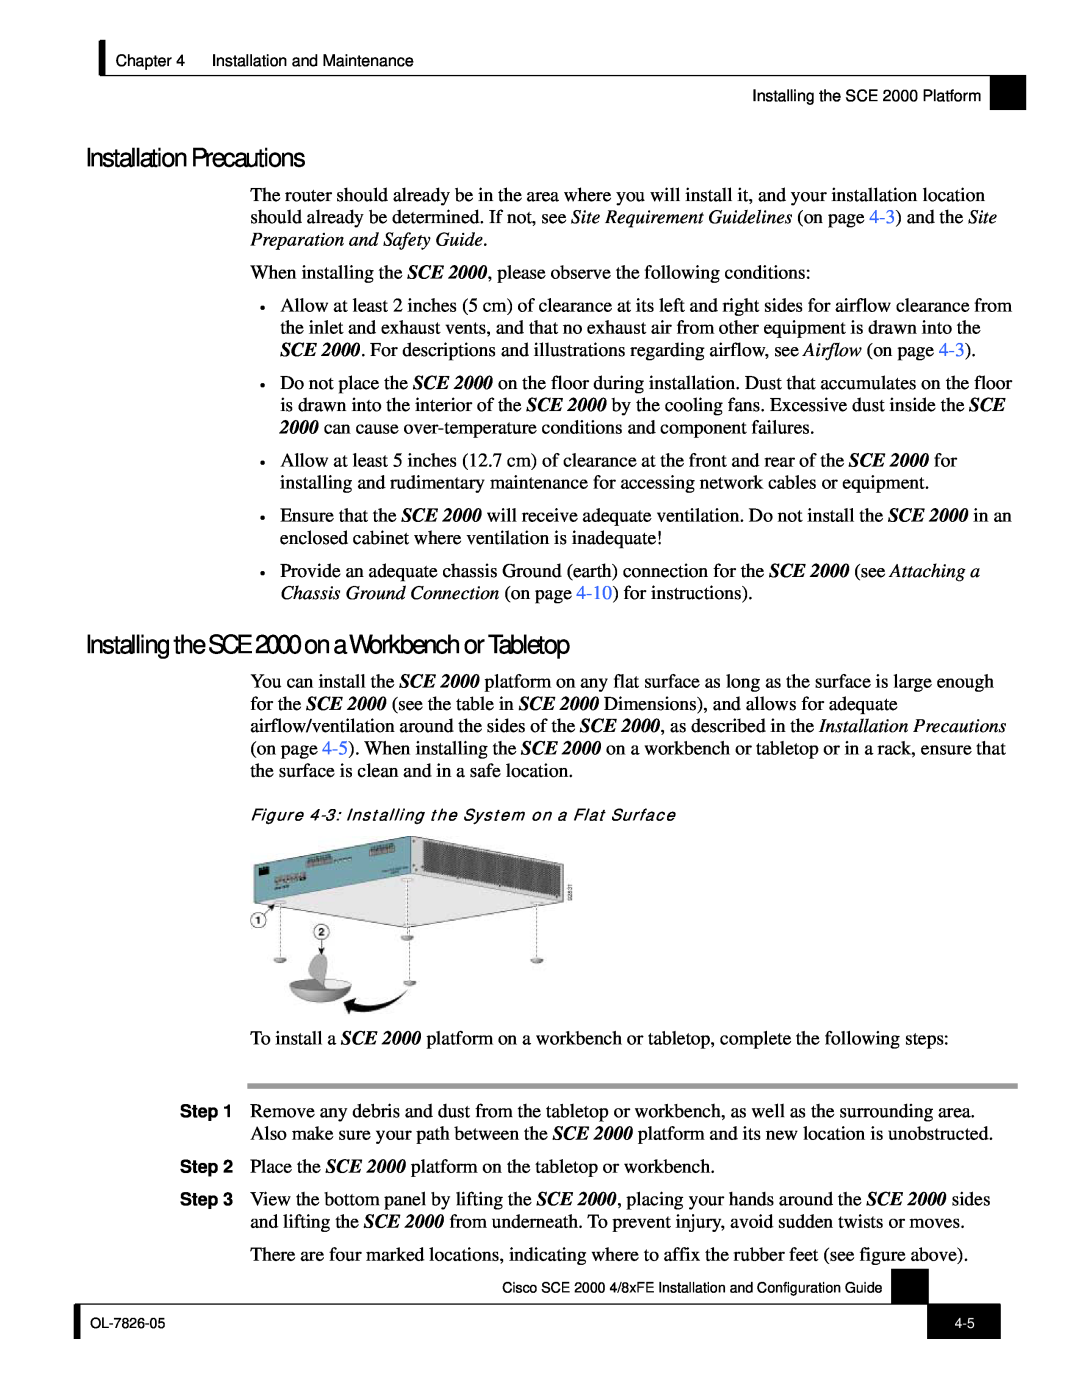 Cisco Systems SCE 2000 4/8xFE manual Installation Precautions, Installing the SCE 2000 on a Workbench or Tabletop 